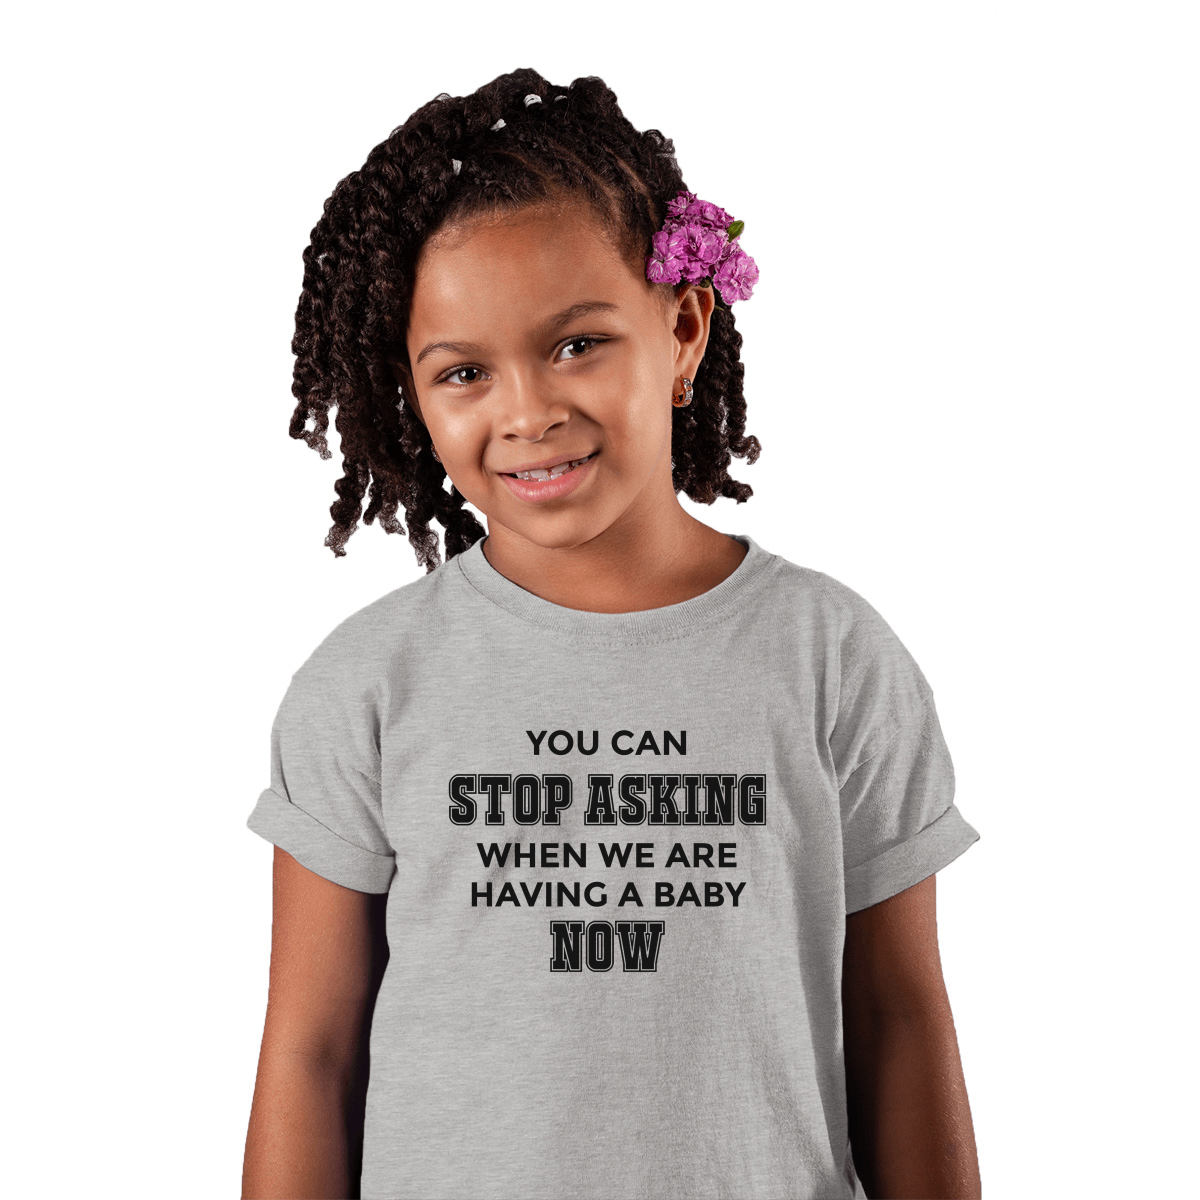 You can stop asking when we are having baby NOW Kids T-shirt | Gray